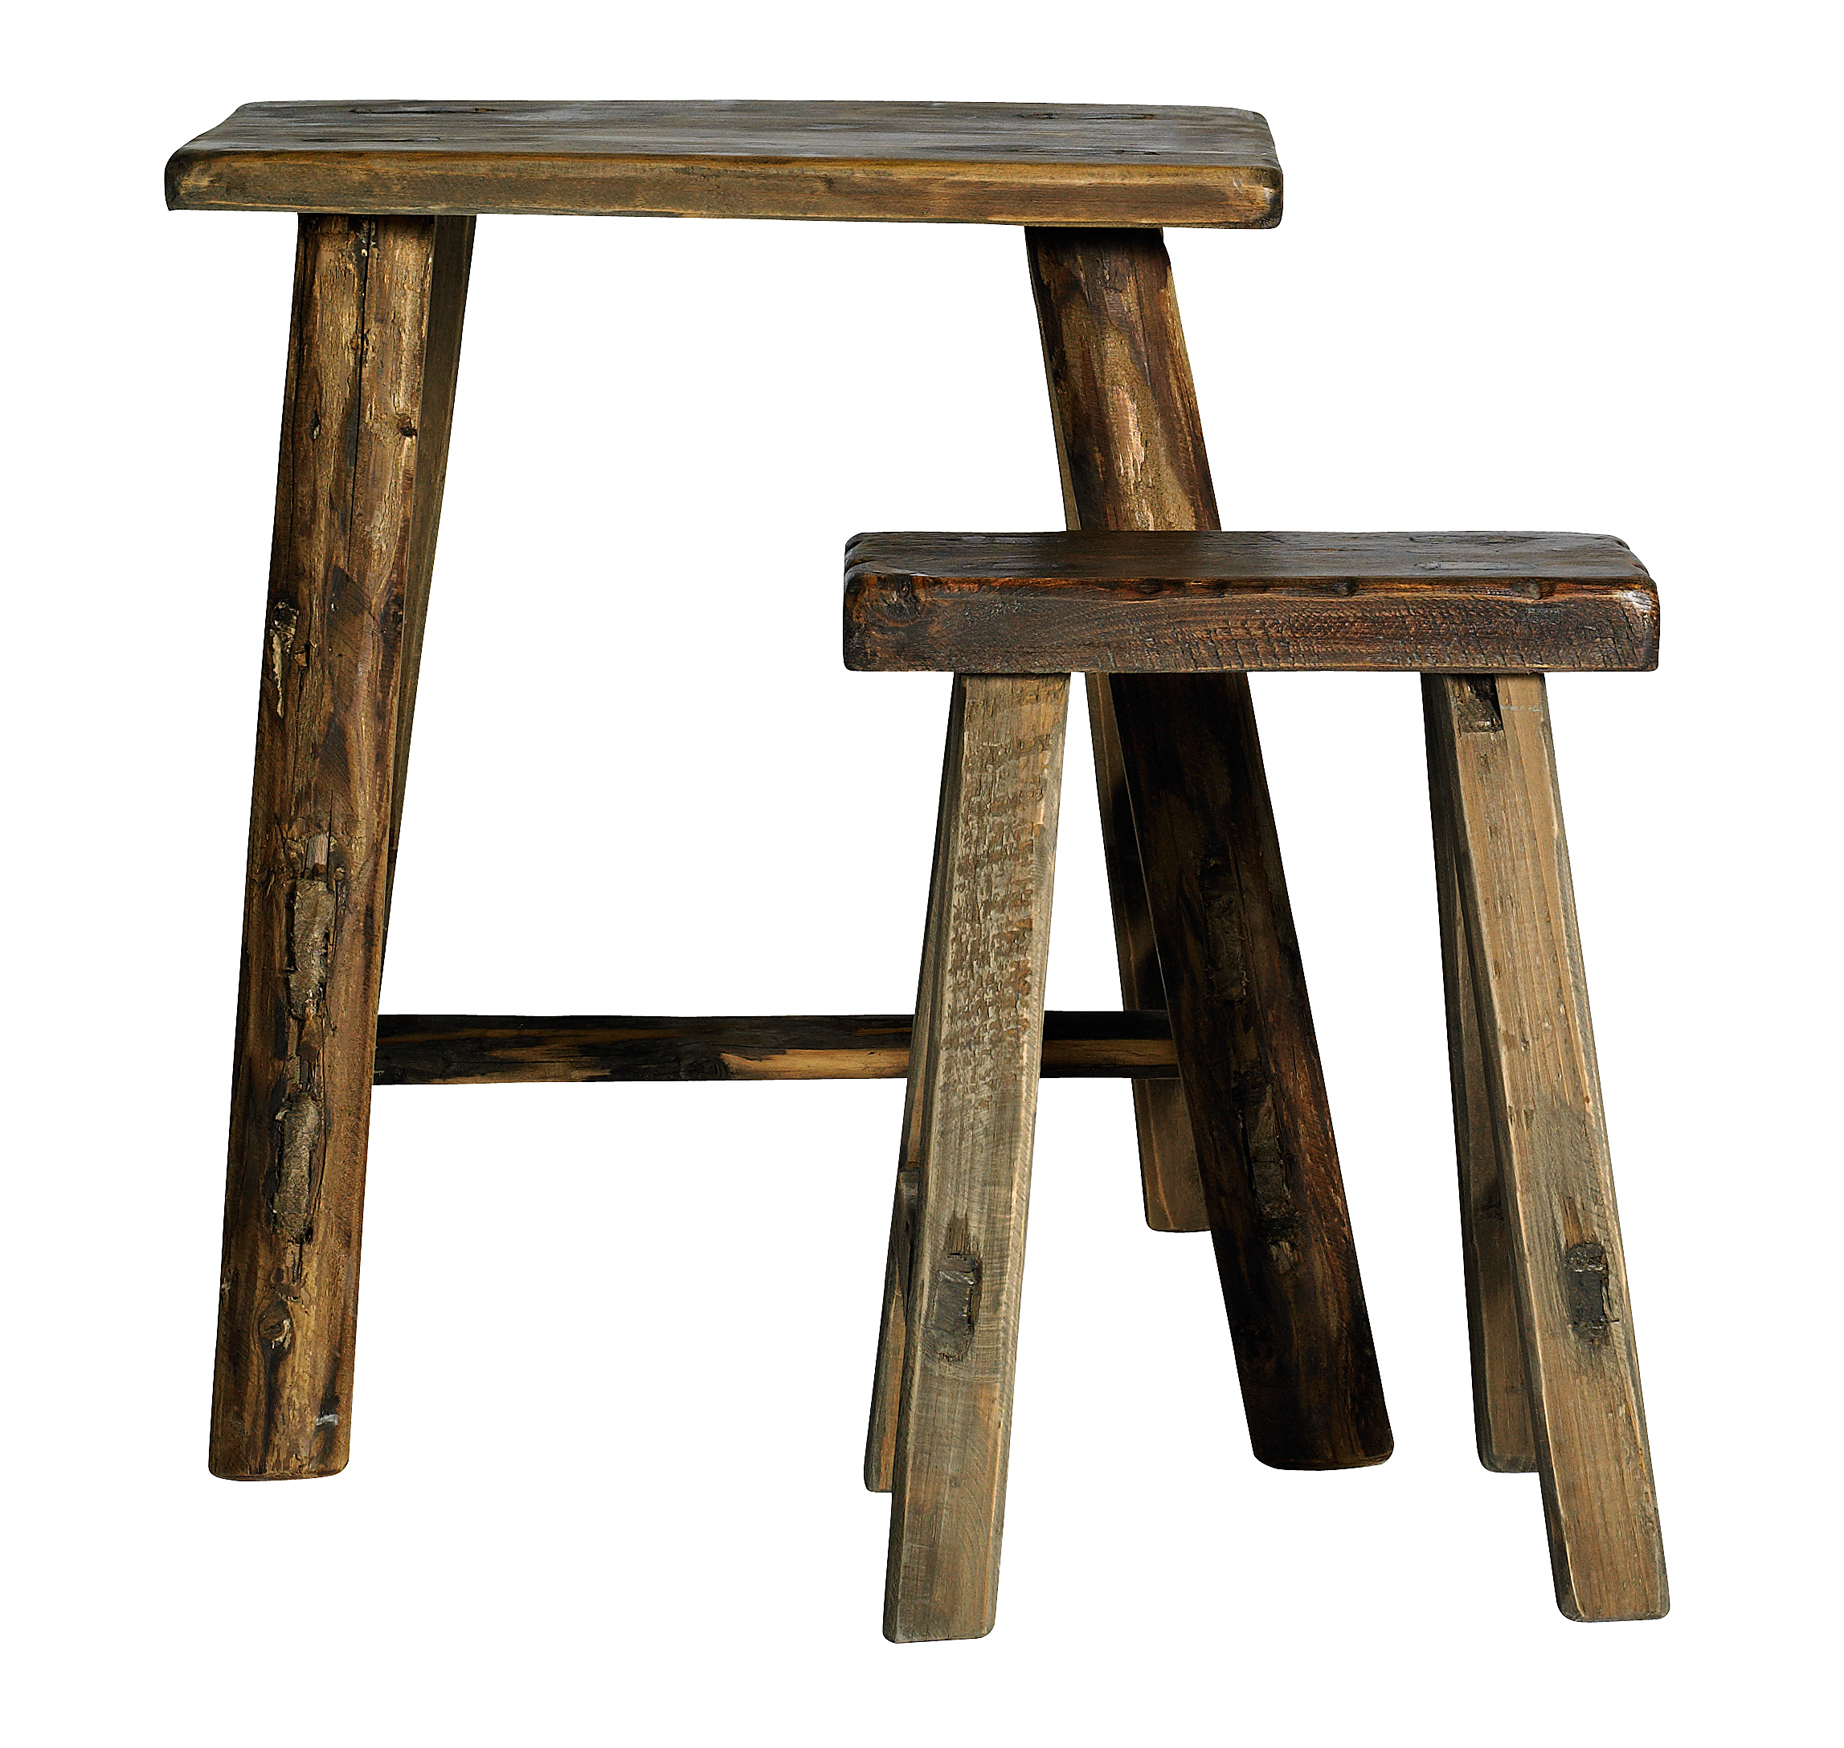 Nordal Spruce Wood Stools with Rustic Look 45x44x53 (L), 30x23x38 (S)